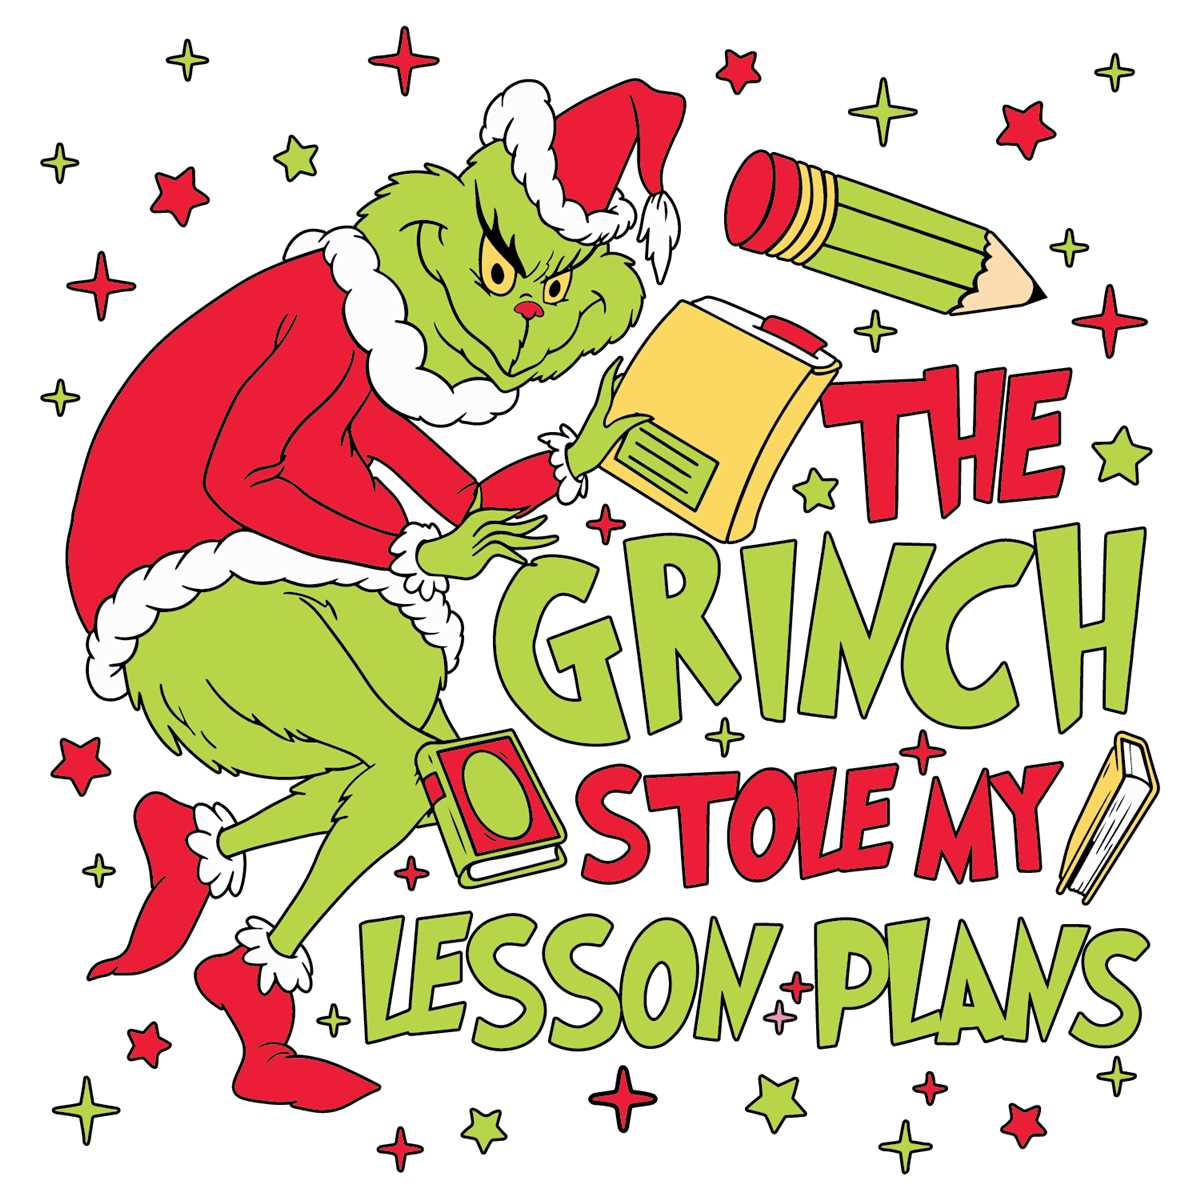 Retro Grinch Stole My Lesson Plans SVG Funny Christmas File - CreativeLify